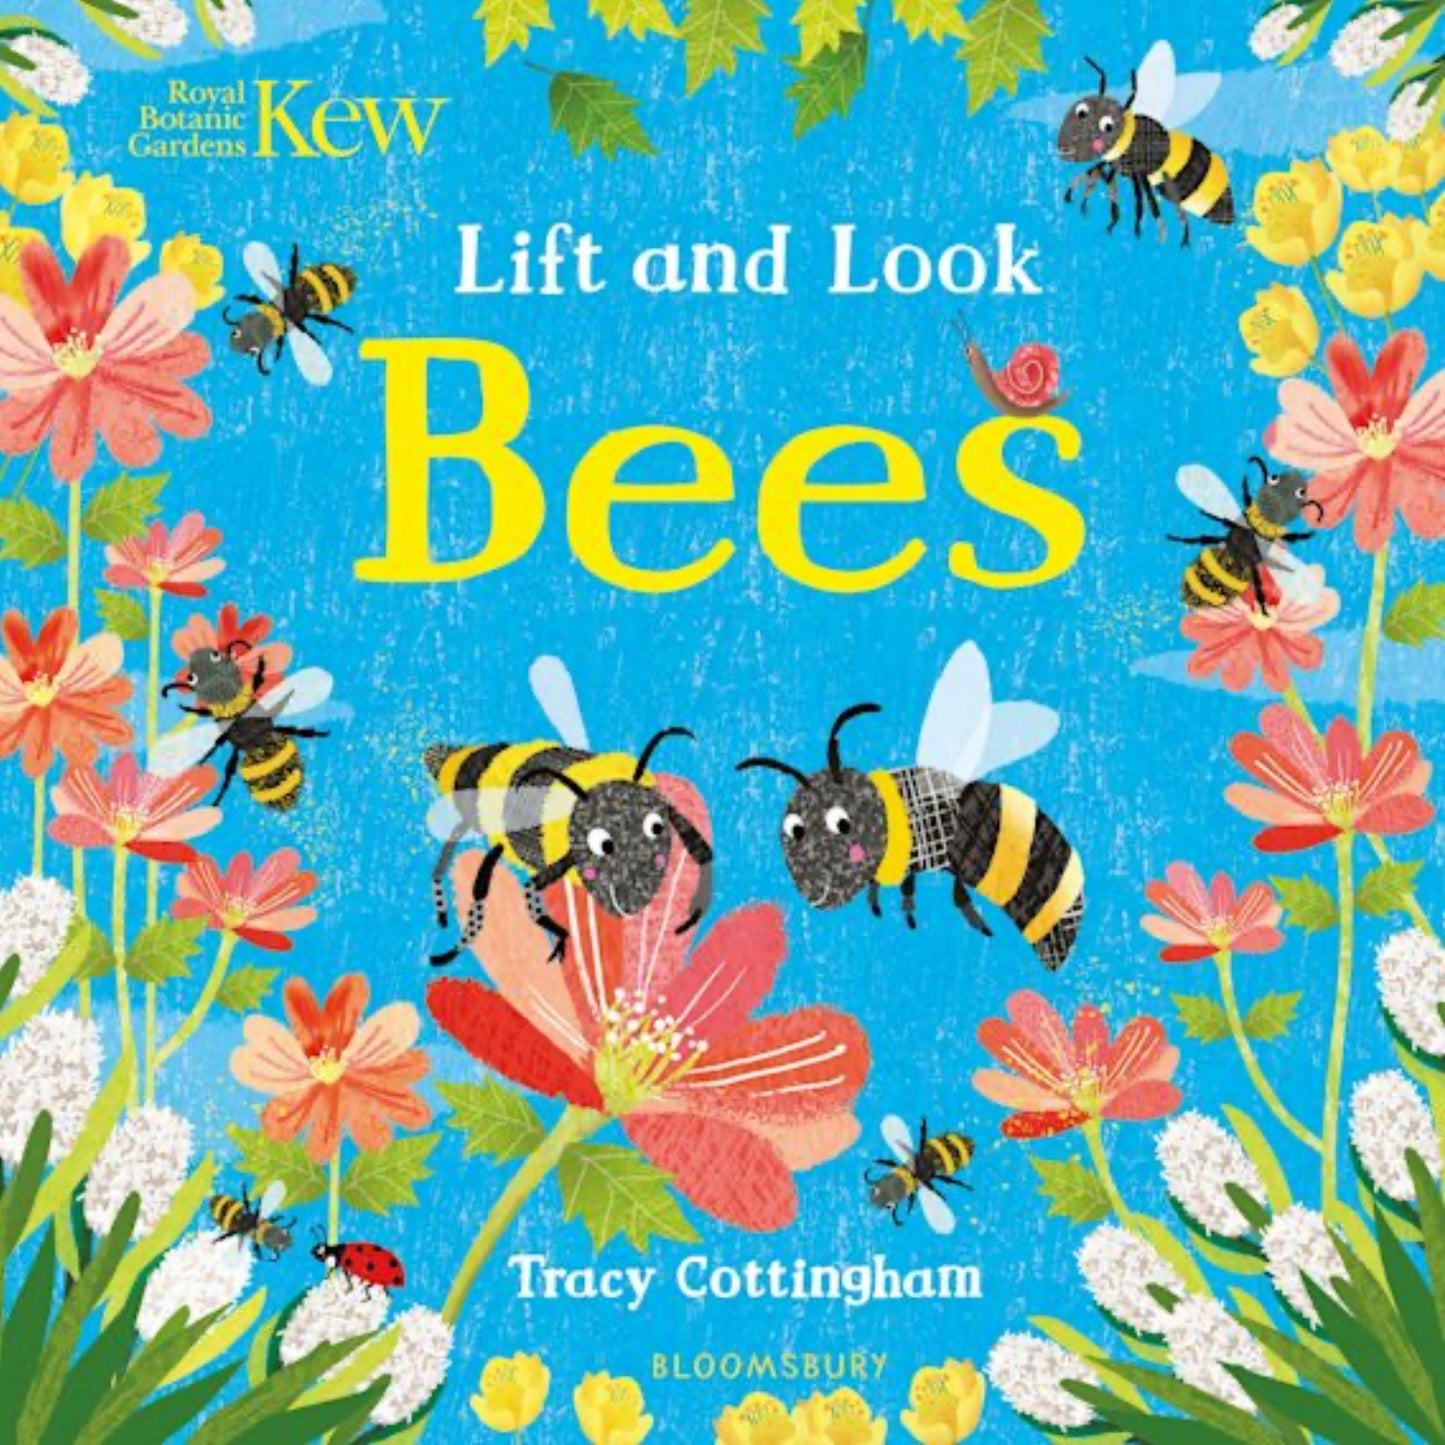 Lift and Look Bees - Kew | Children's Board Book on Nature